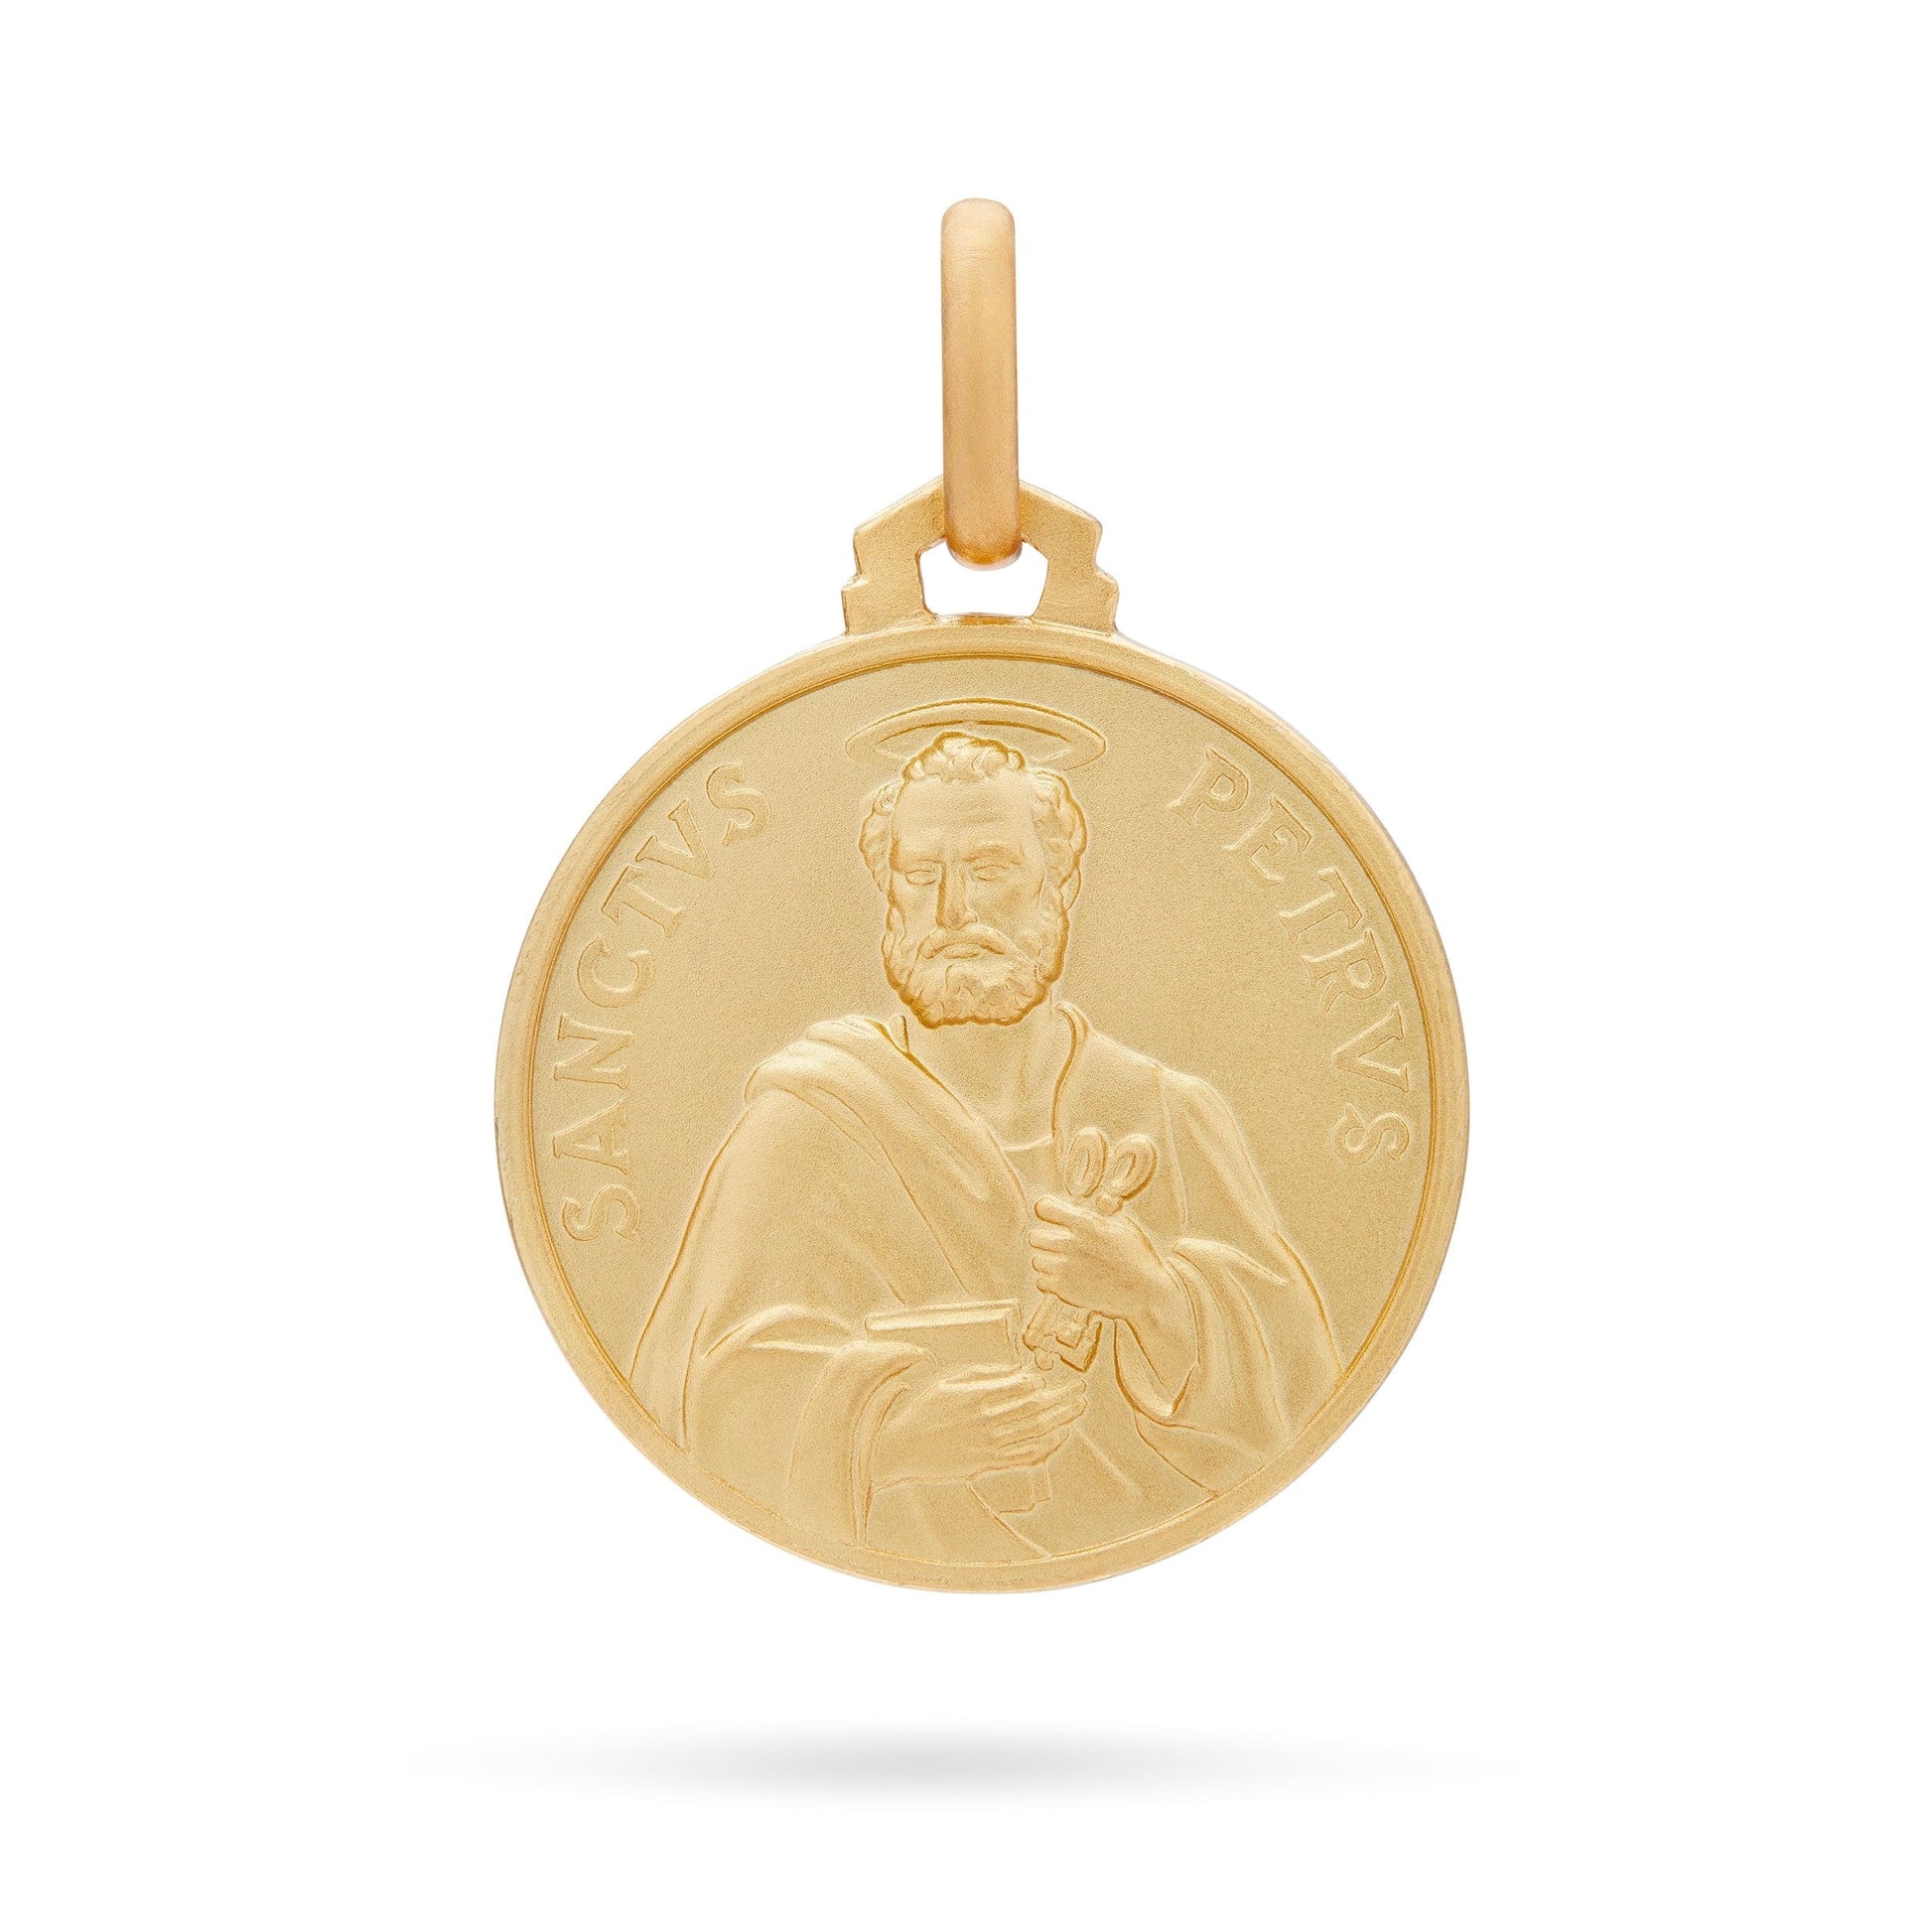 MONDO CATTOLICO Medal 18 mm (0.70 in) Gold medal of Saint Peter